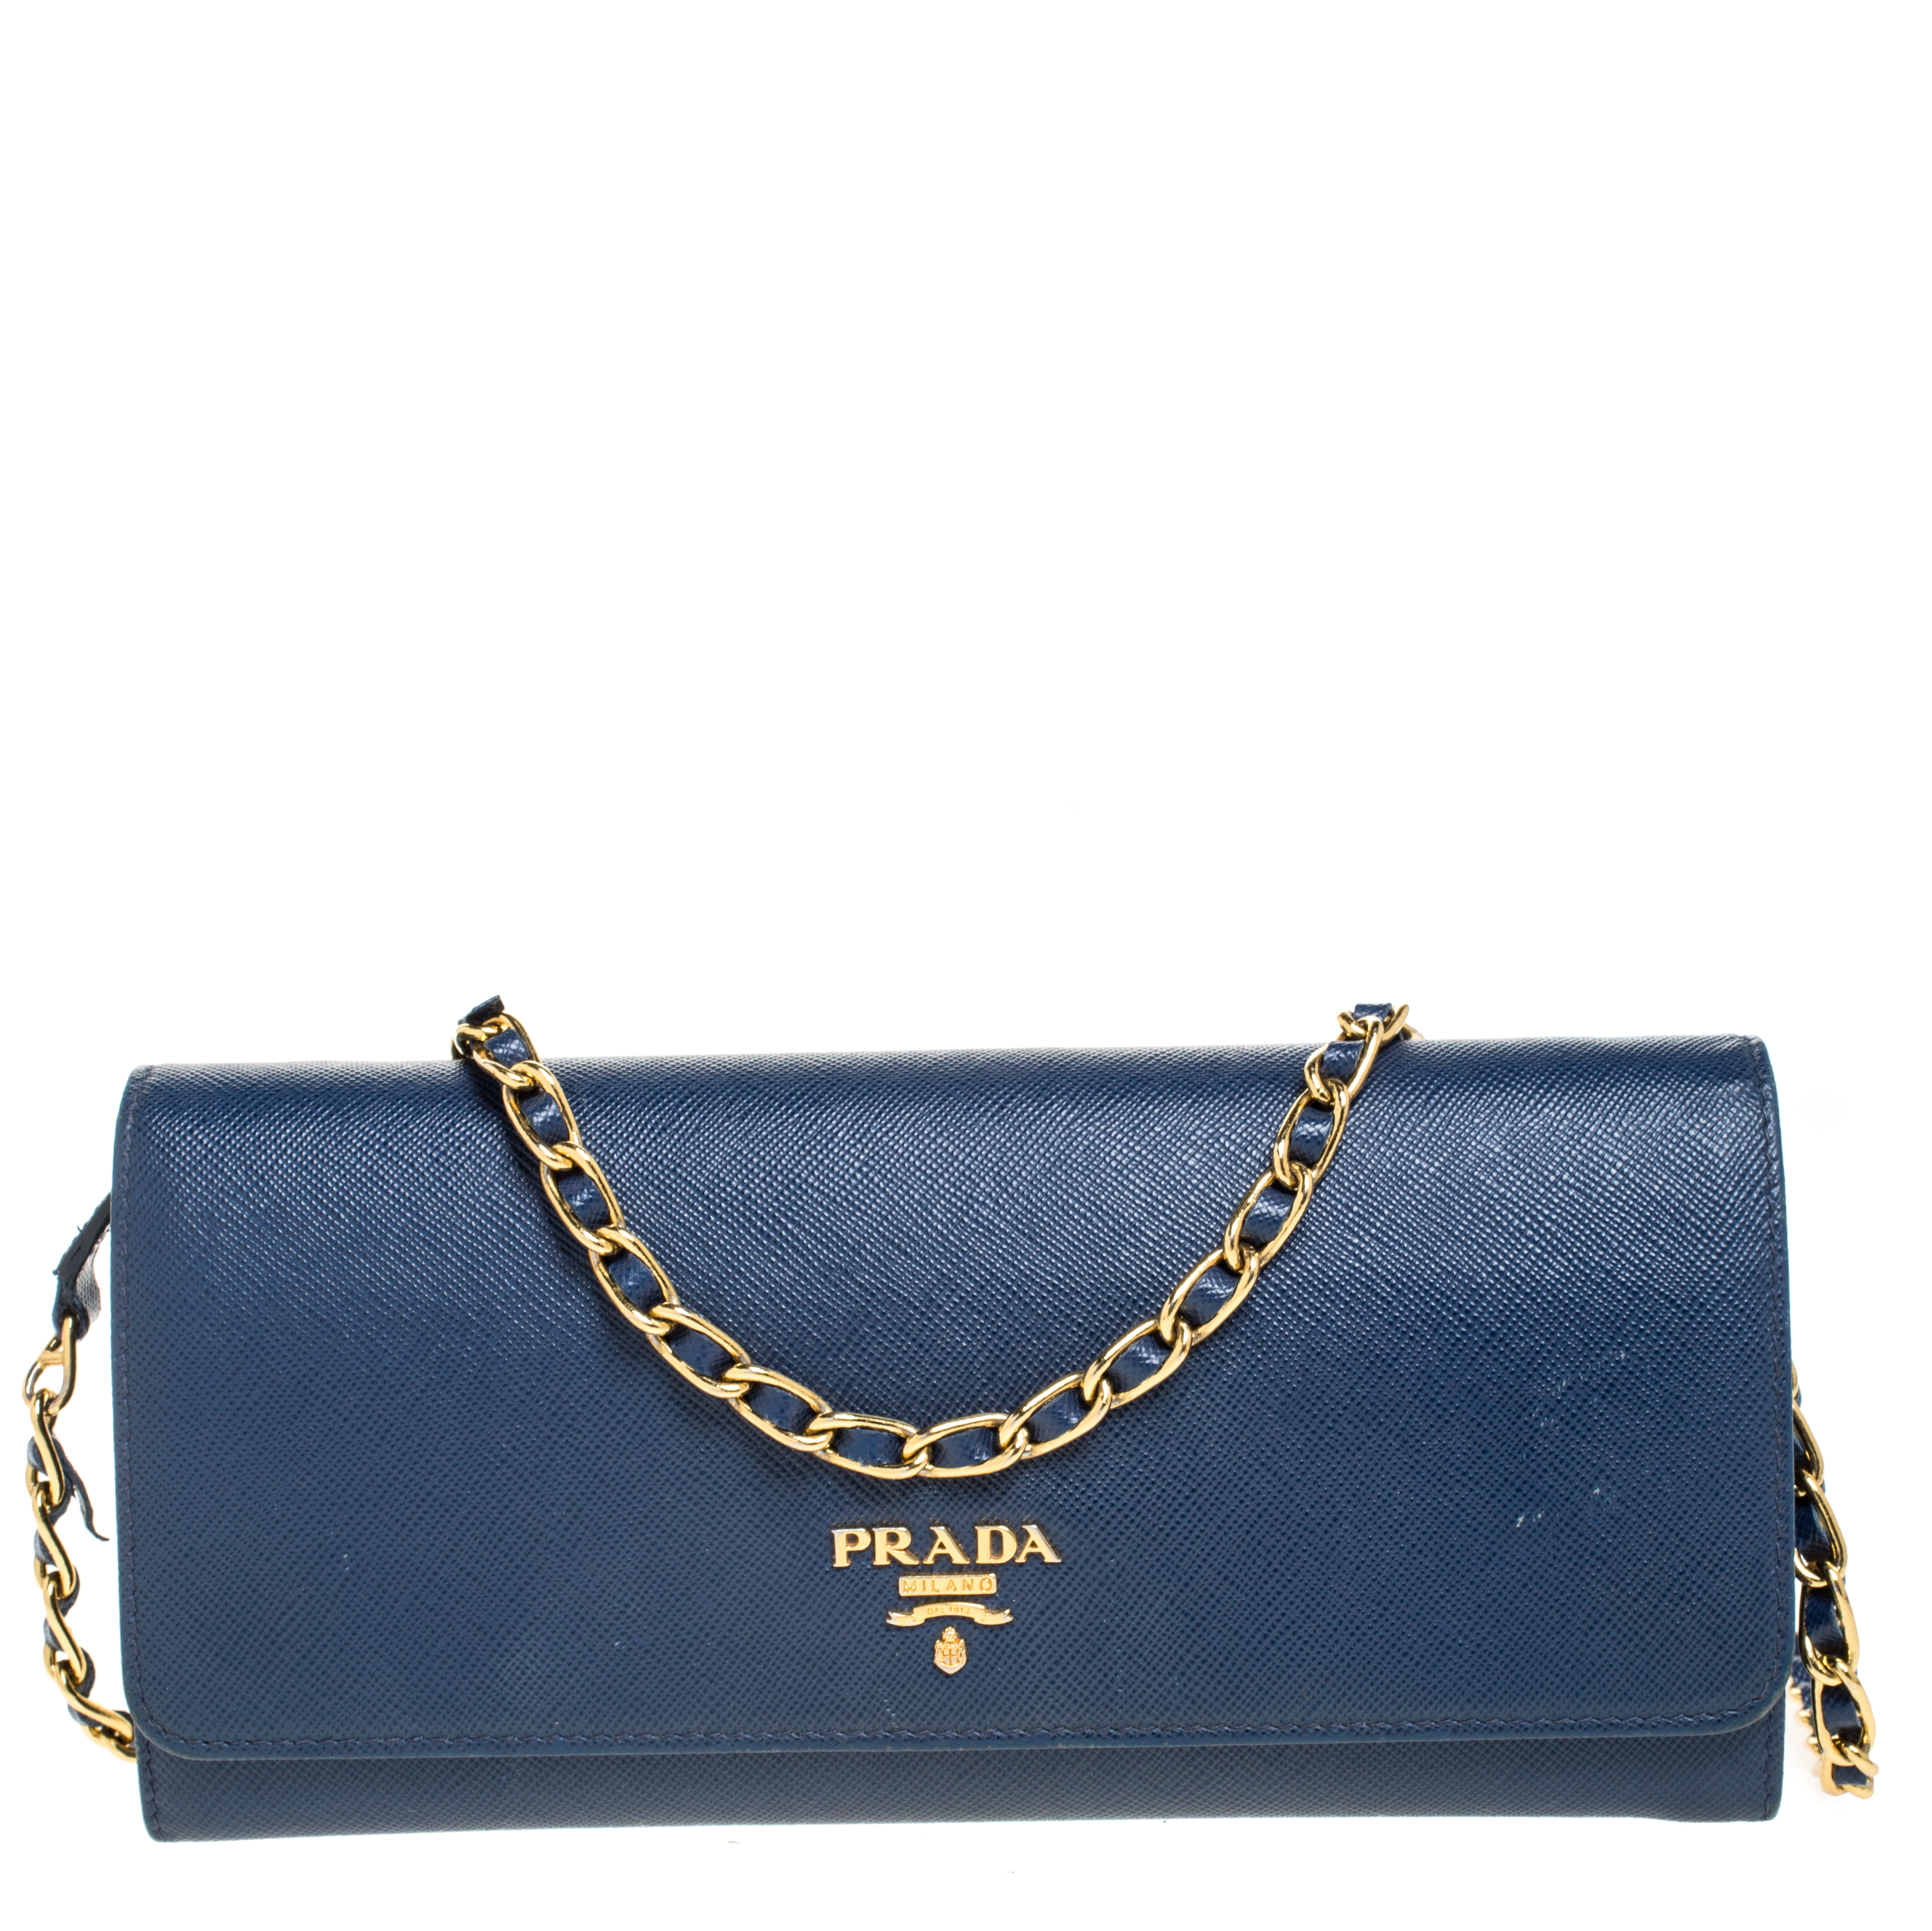 Prada Navy Blue Saffiano Lux Leather Wallet on Chain